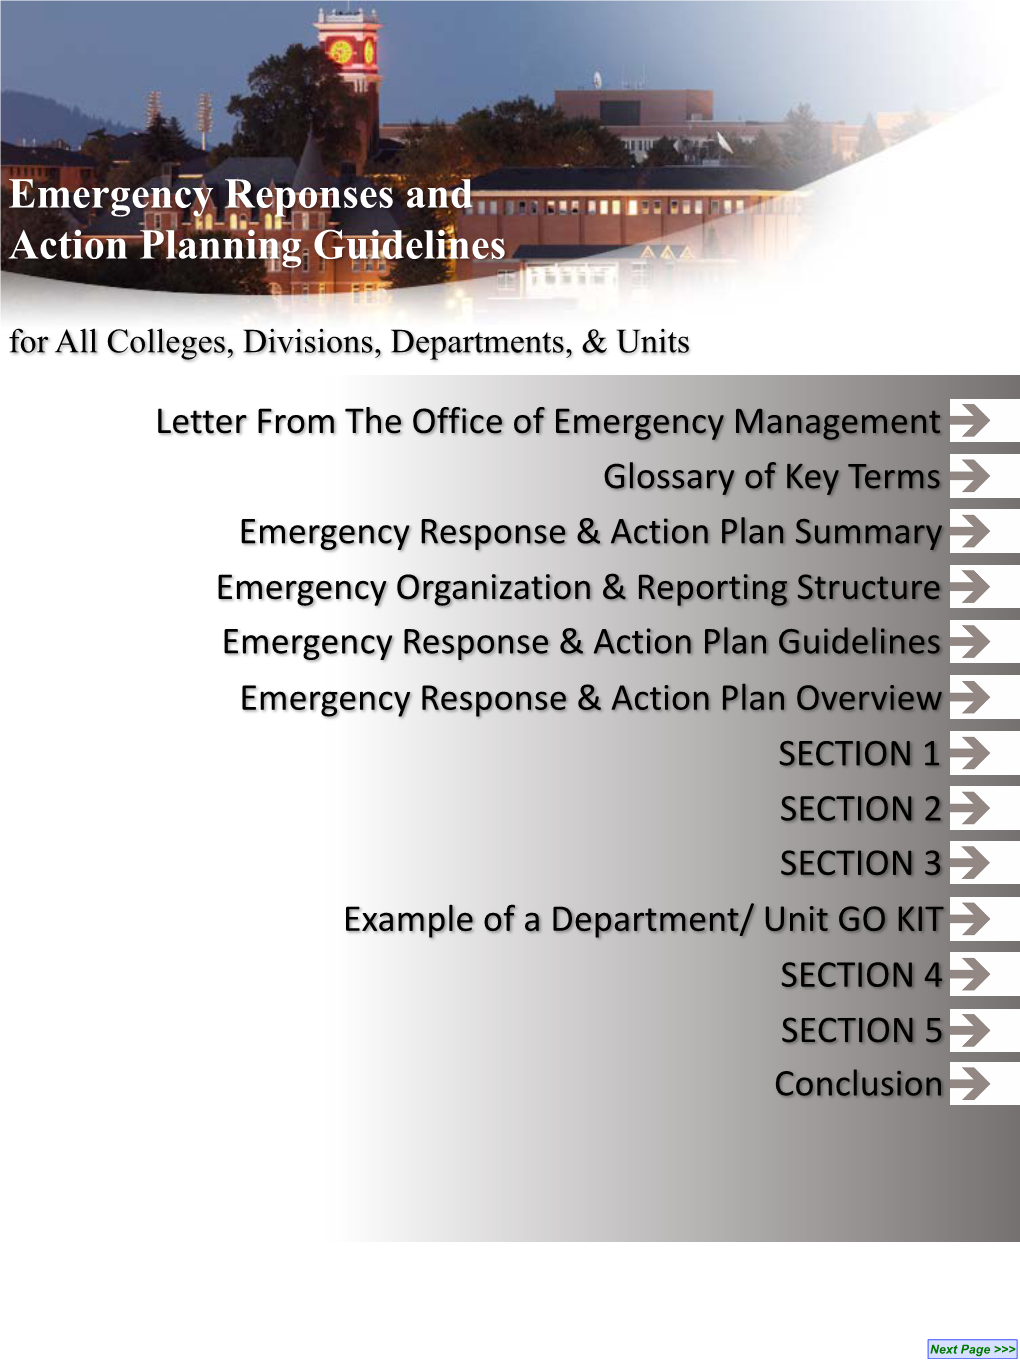 Emergency Reponses and Action Planning Guidelines for All Colleges, Divisions, Departments, & Units